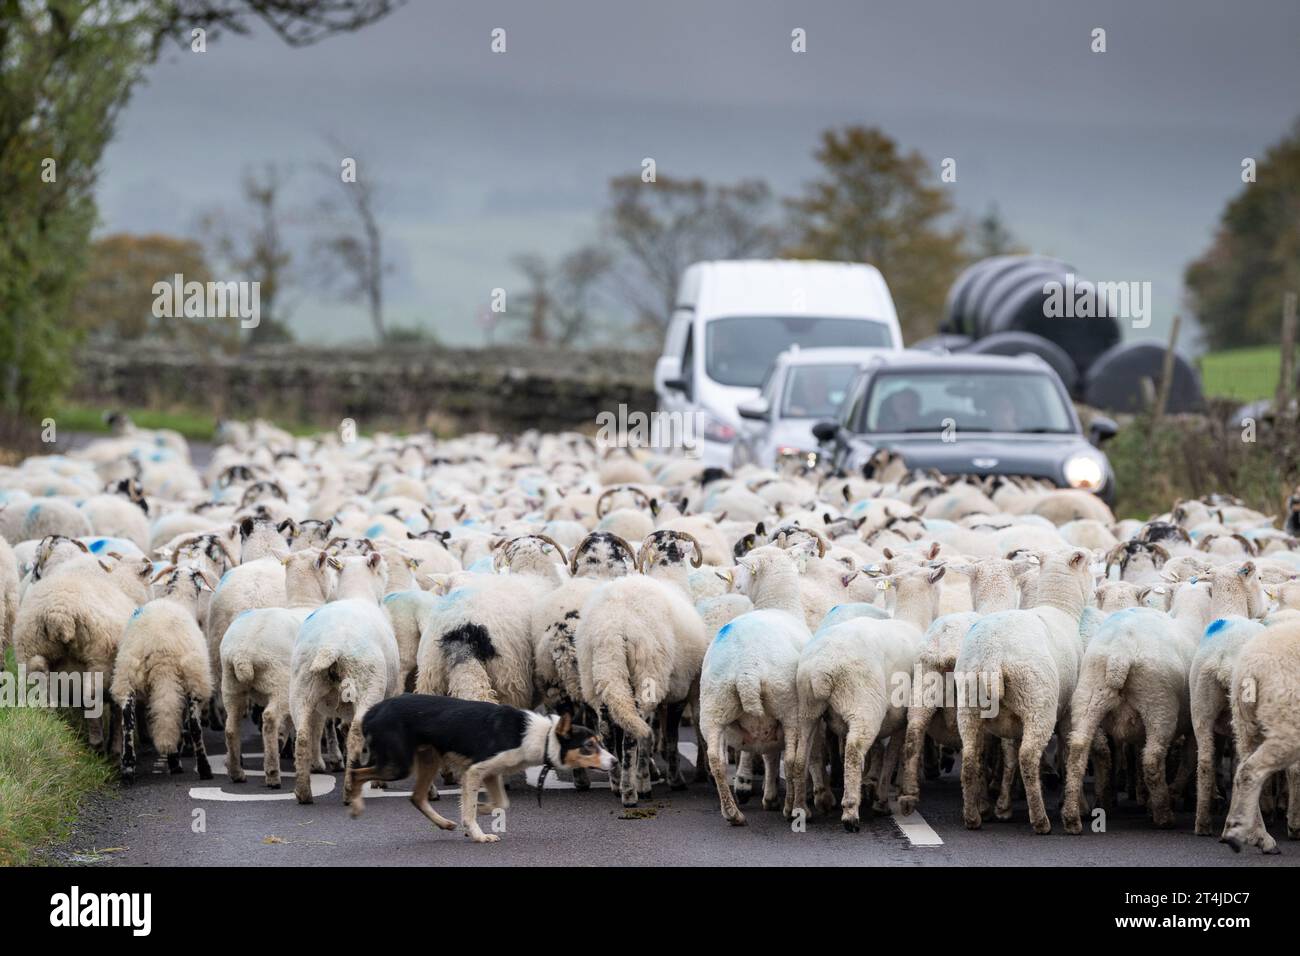 Moving a flock of sheep down a rural road near Hawes in the Yorkshire Dales National Park, UK. Stock Photo